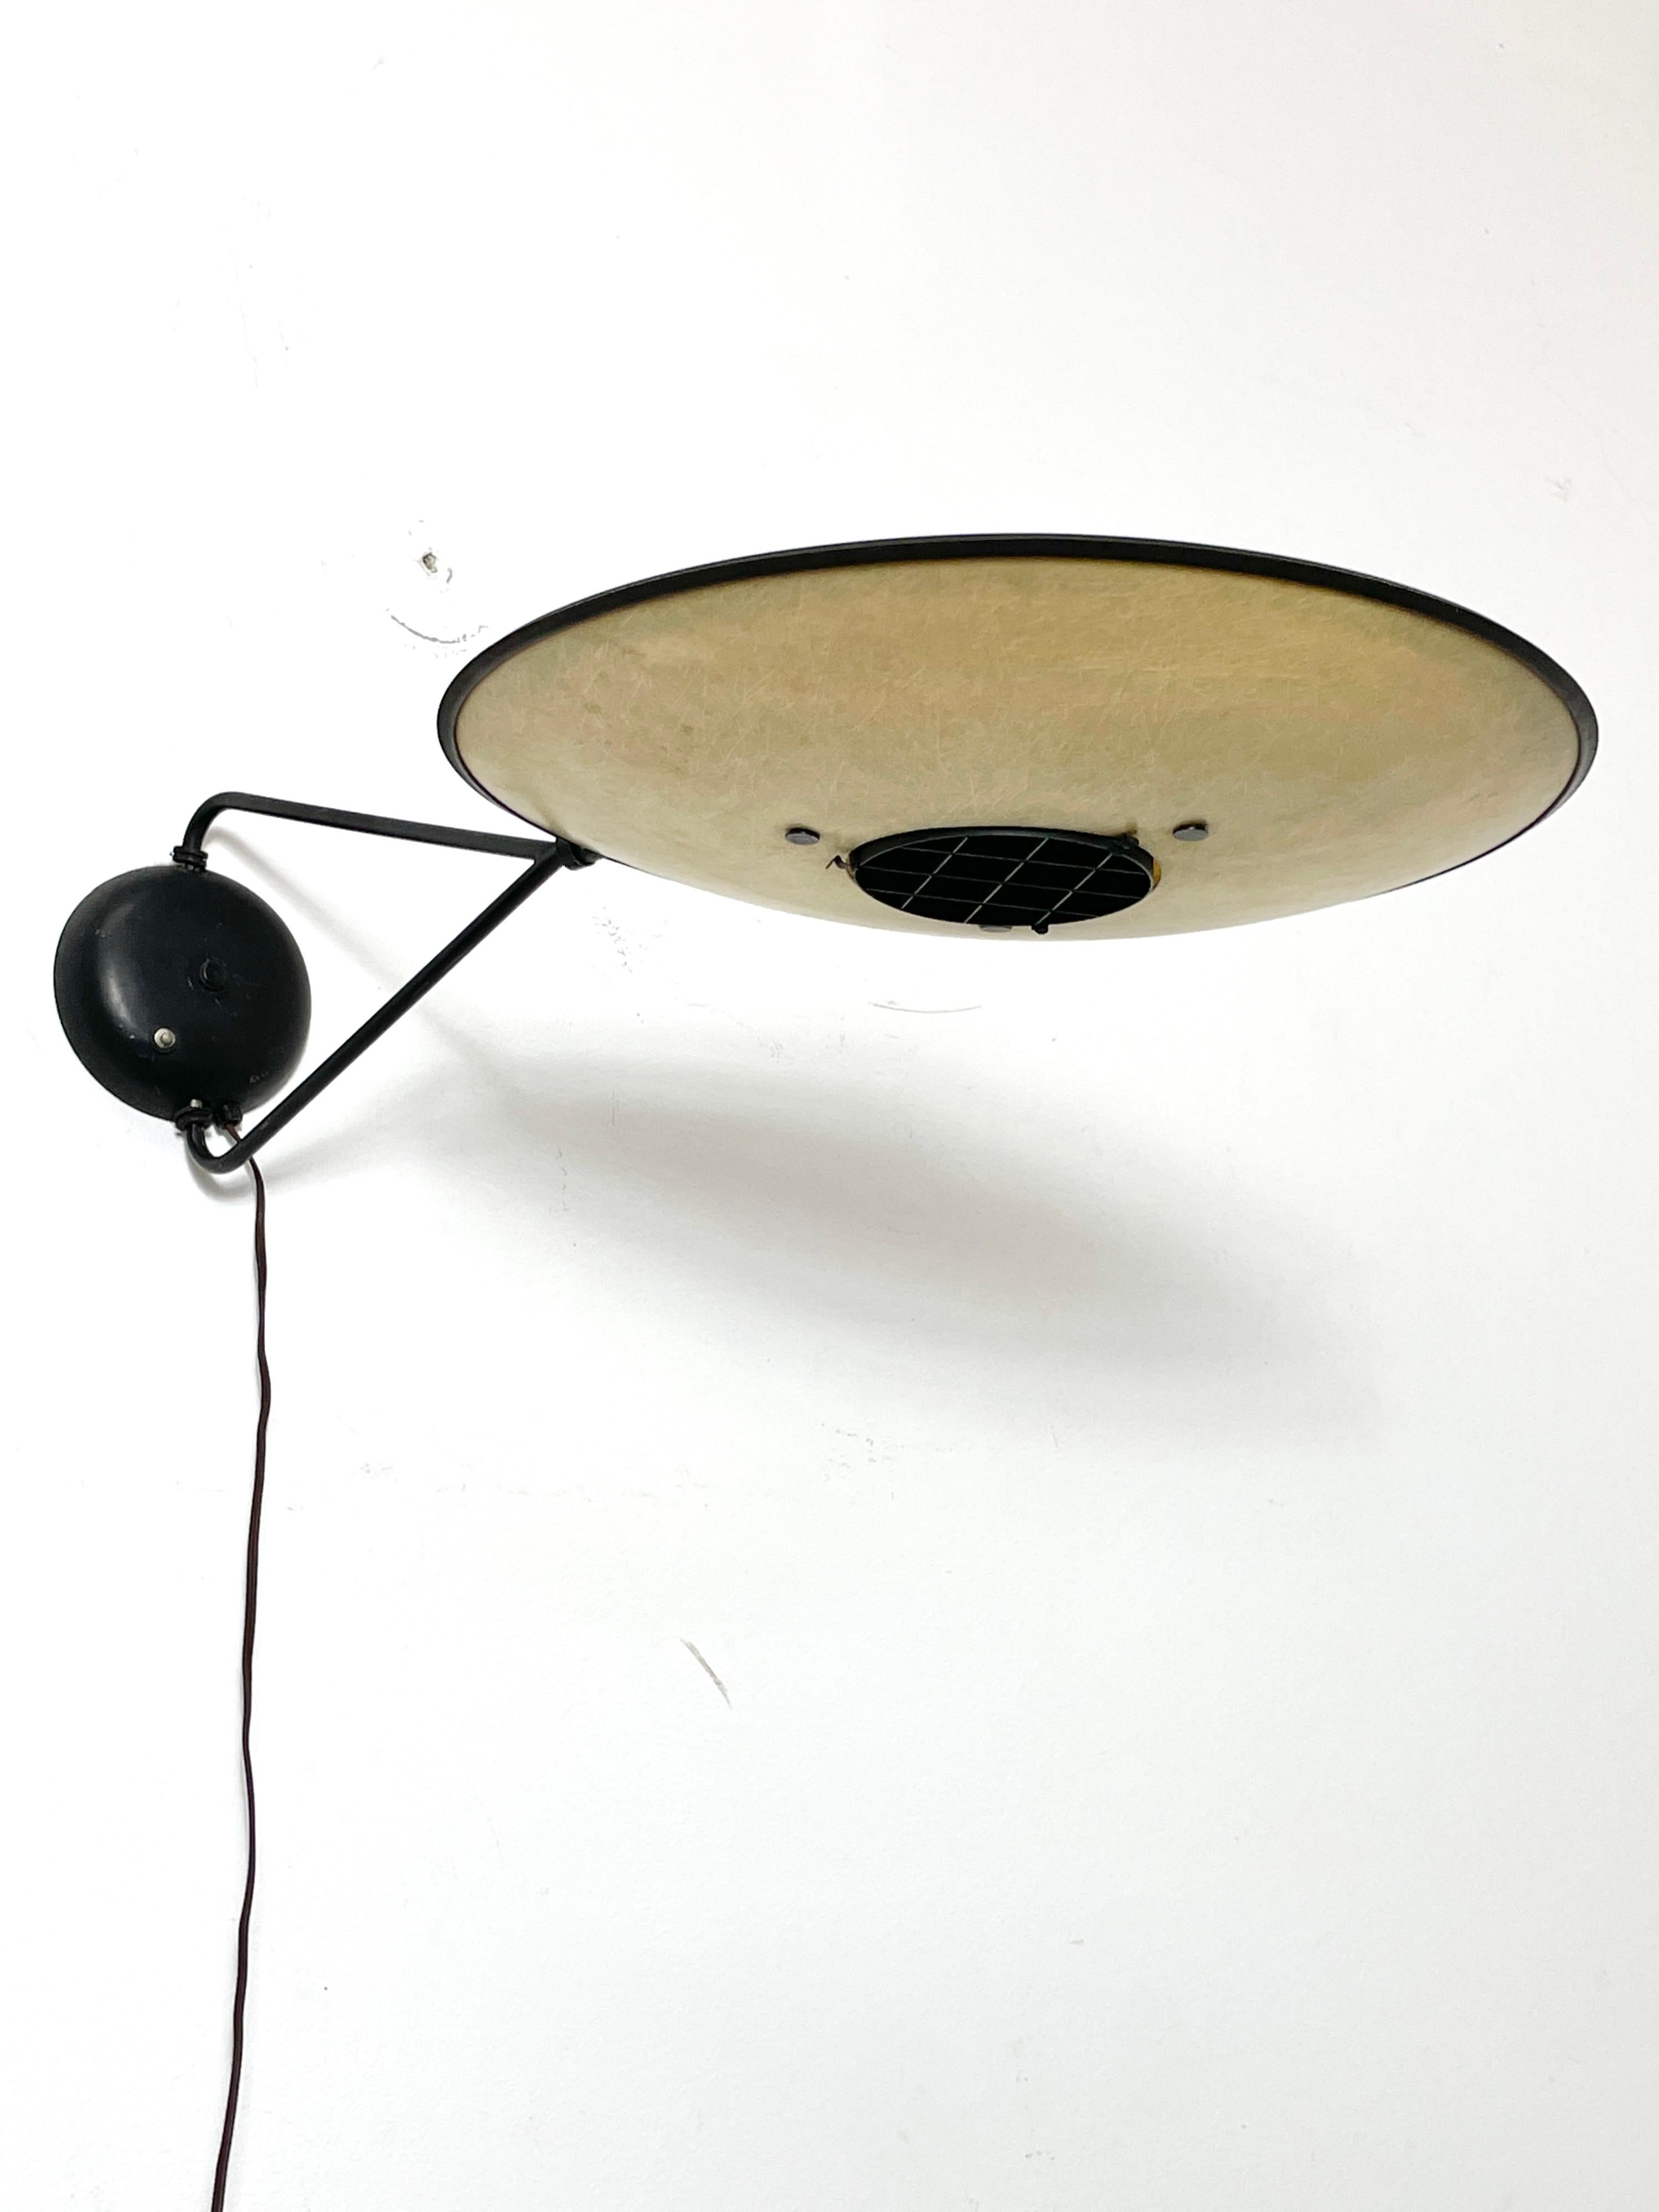 Mitchell Bobrick Controlight Wall Mount Articulating Saucer Sconce Lamp 1950s In Good Condition For Sale In Troy, MI